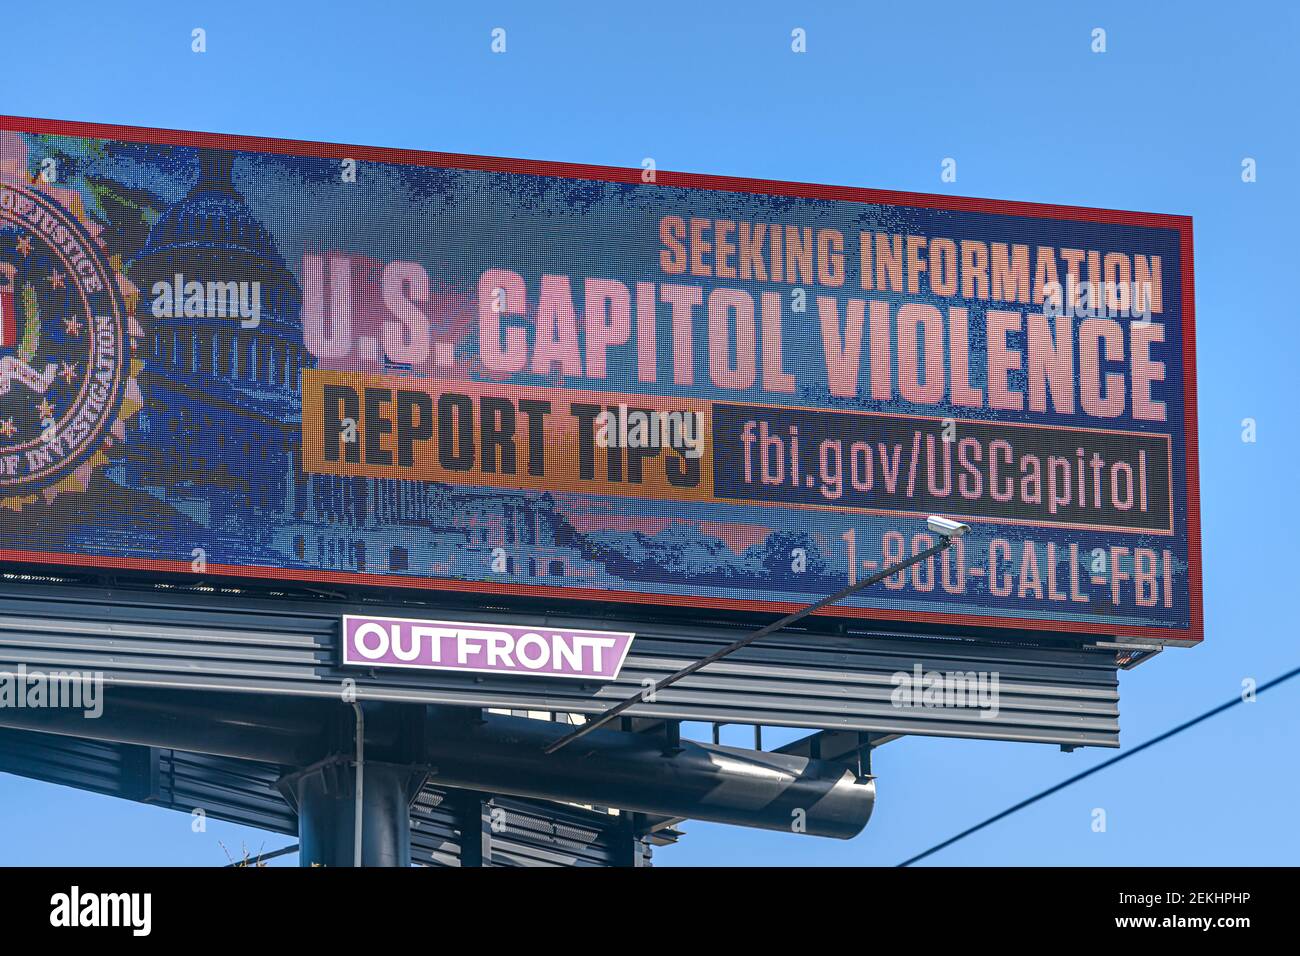 Orlando, USA - January 16, 2021: Florida highway road sign text for seeking information on US capitol violence from fbi department of justice Stock Photo